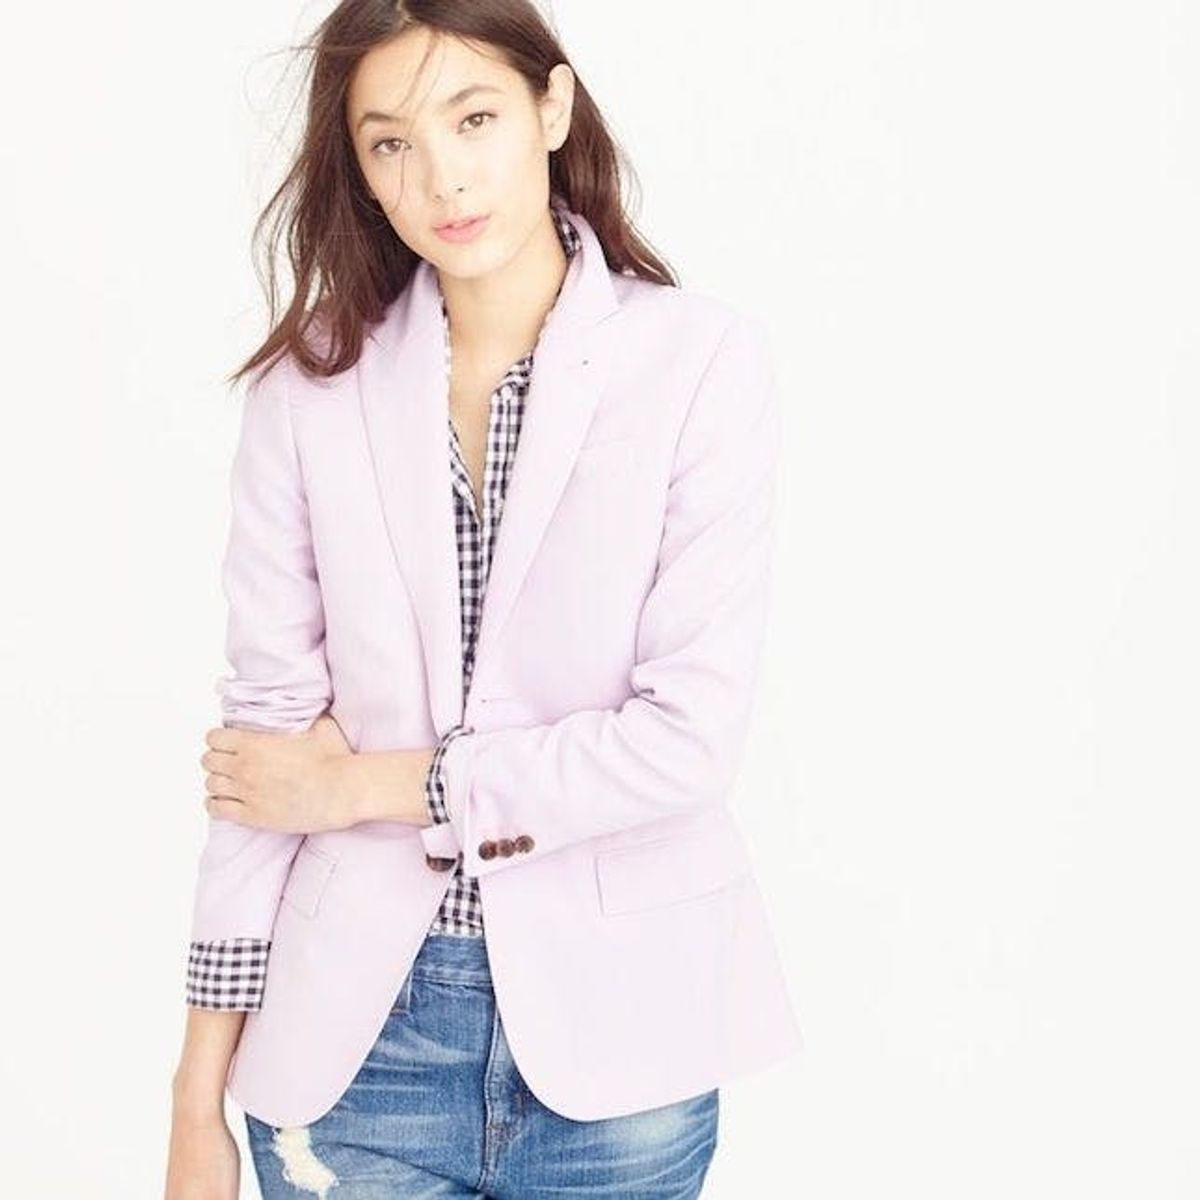 21 Work Wardrobe Essentials That Prove Pink Is the New Power Color